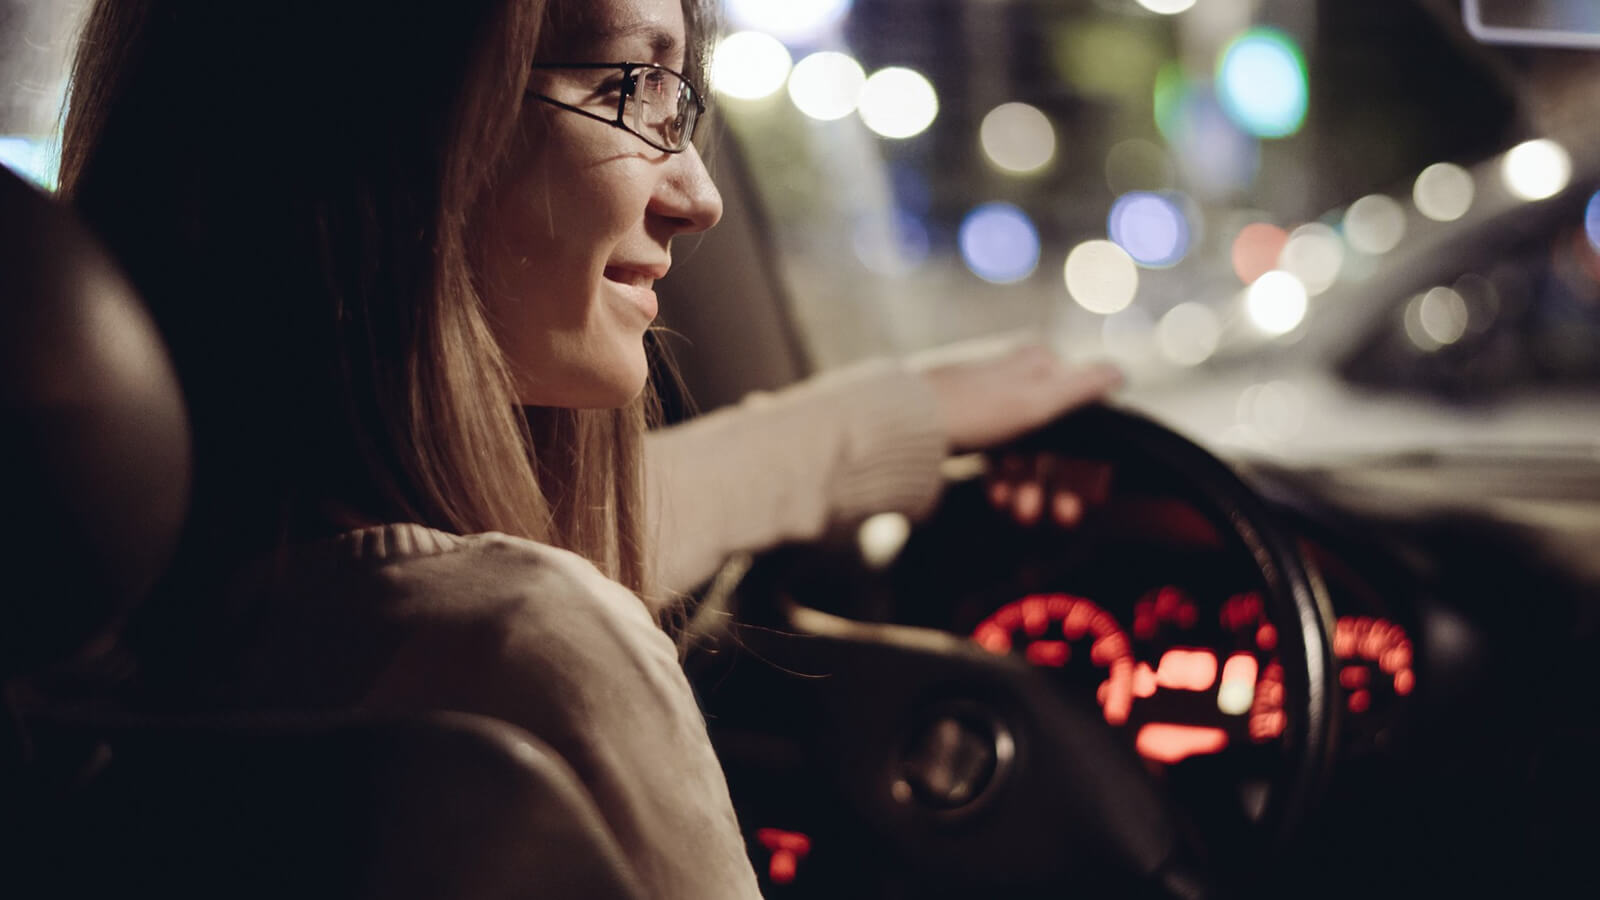 Night Driving Glasses Are Helpful: Fact or Fad?